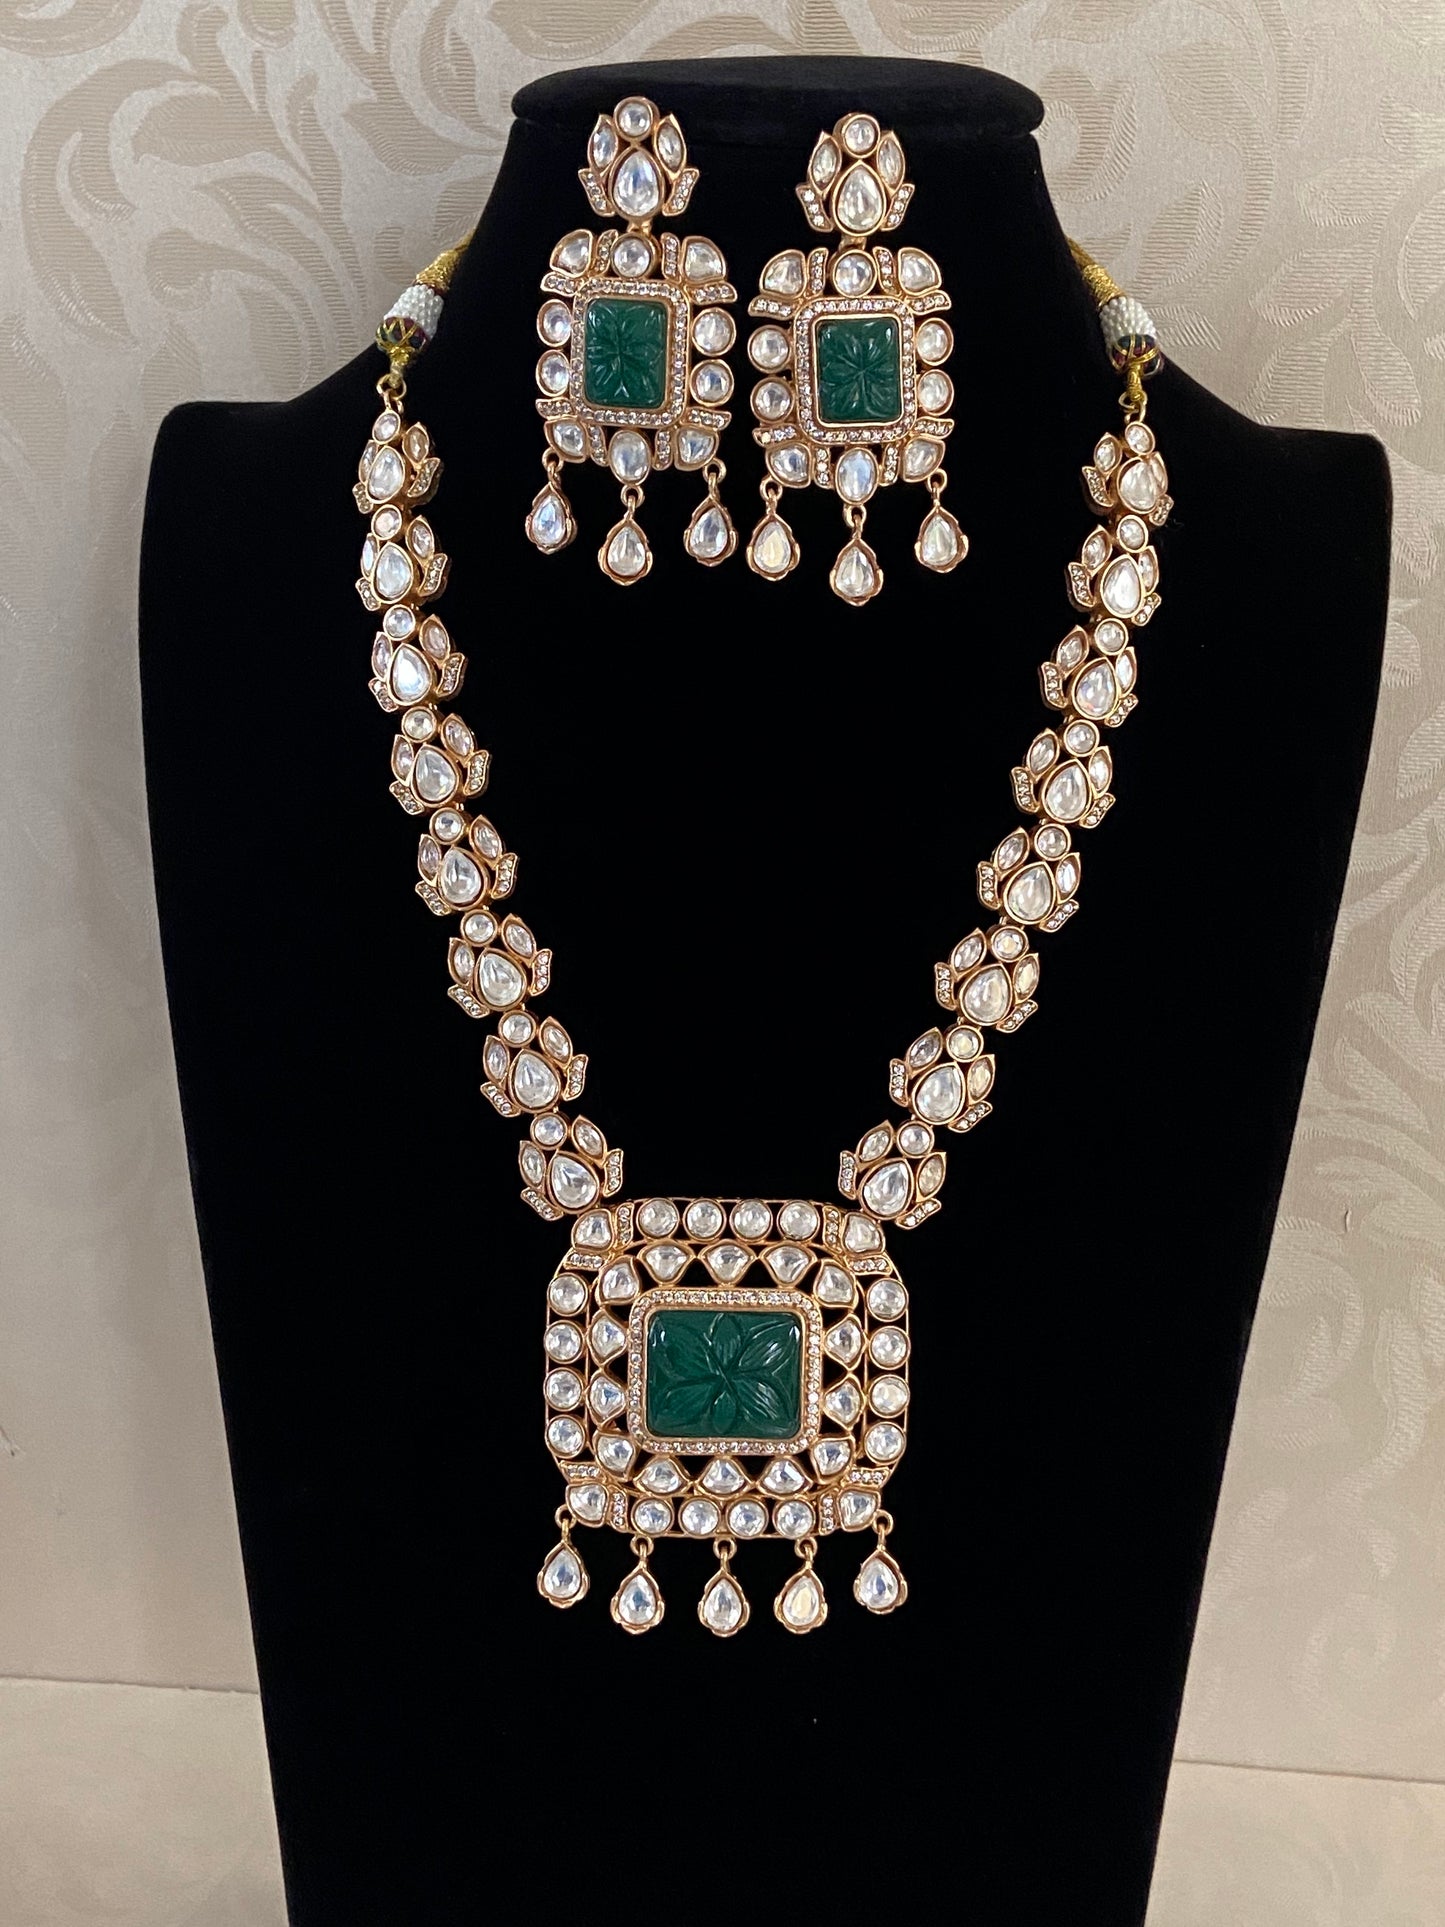 Moissonite necklace | Latest Indian jewellery in USA